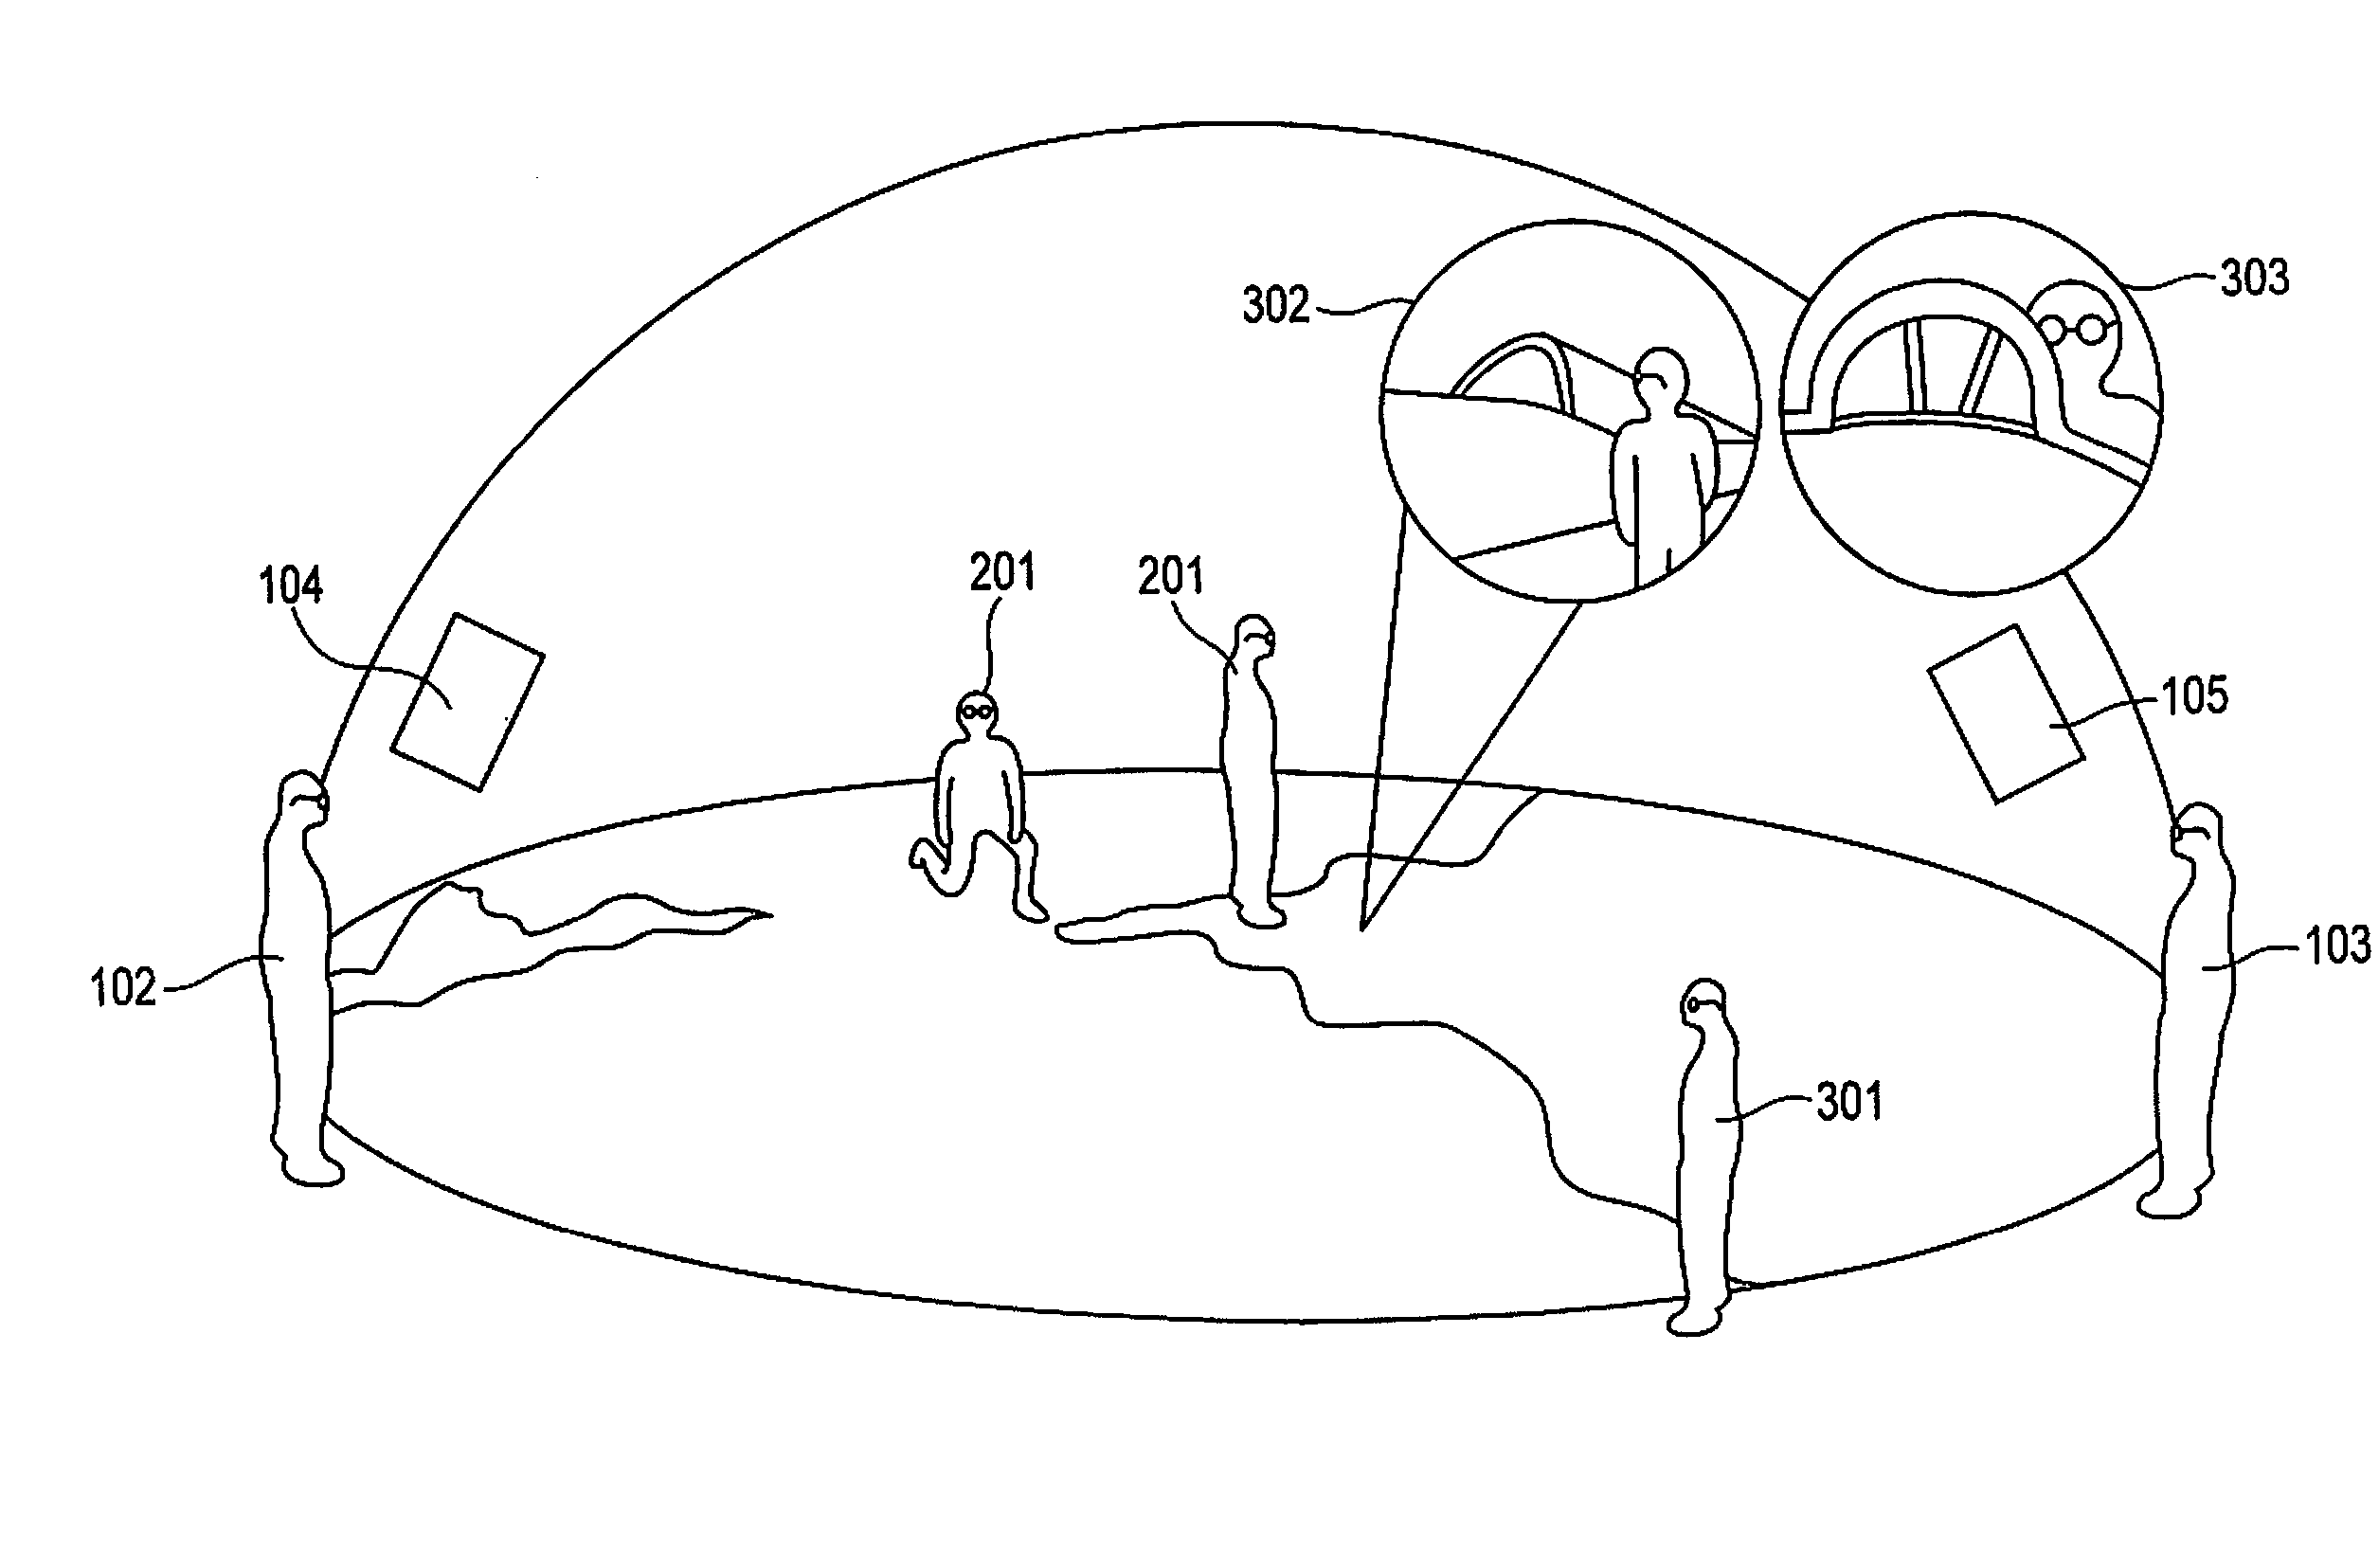 System and Method for 3-Dimensional Display of Image Data